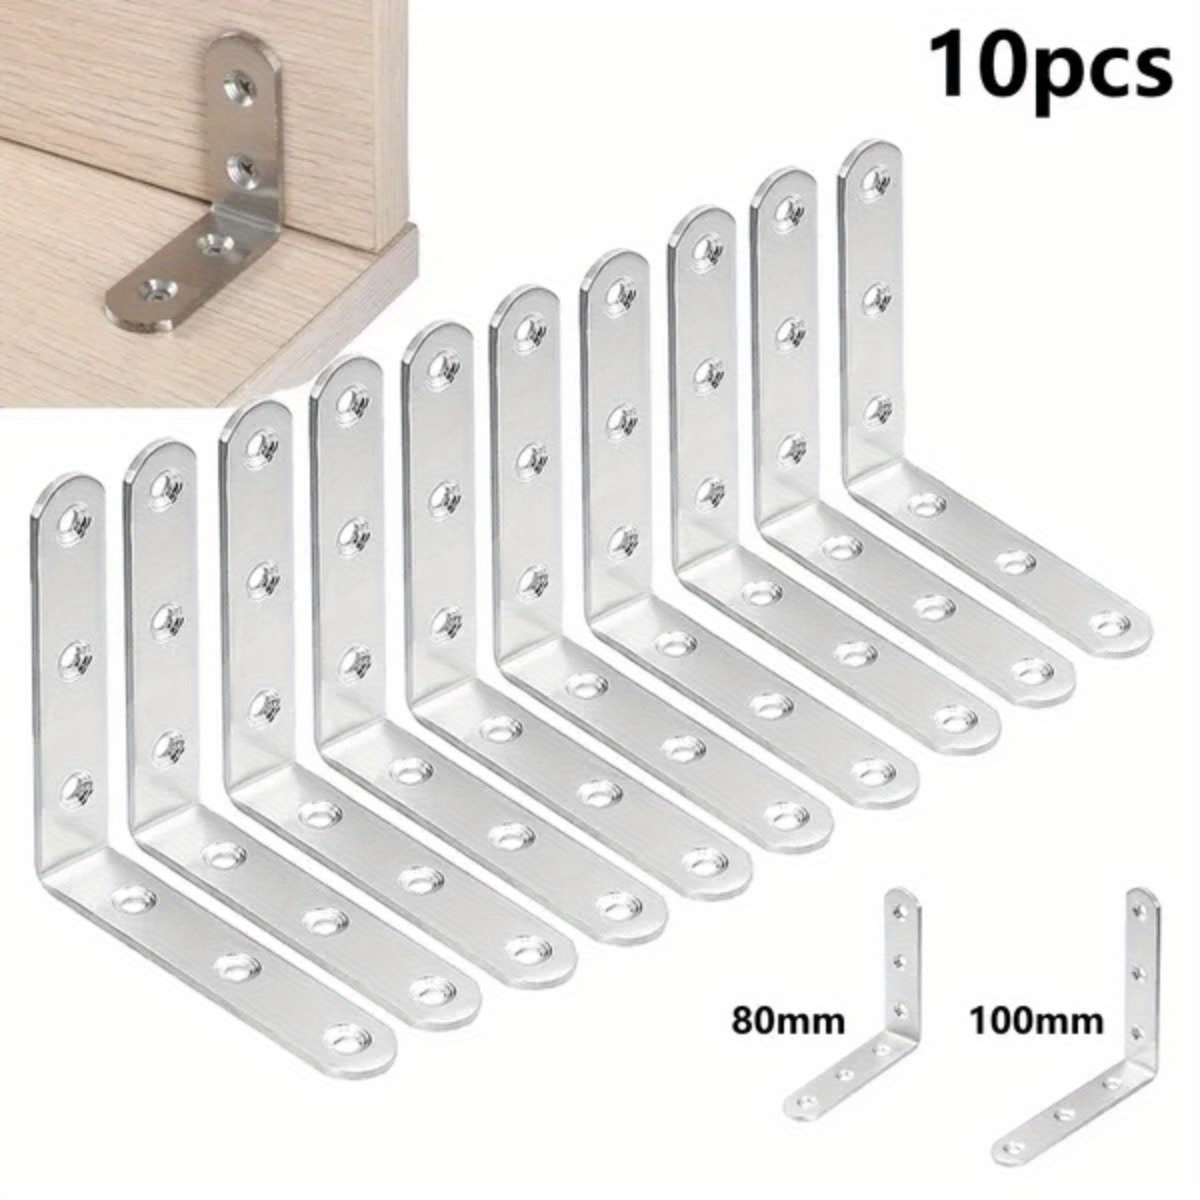 

10pcs Stainless Steel Corner Brace Joint L-shaped Right Angle Bracket Fastener Comes With Screws As A Gift